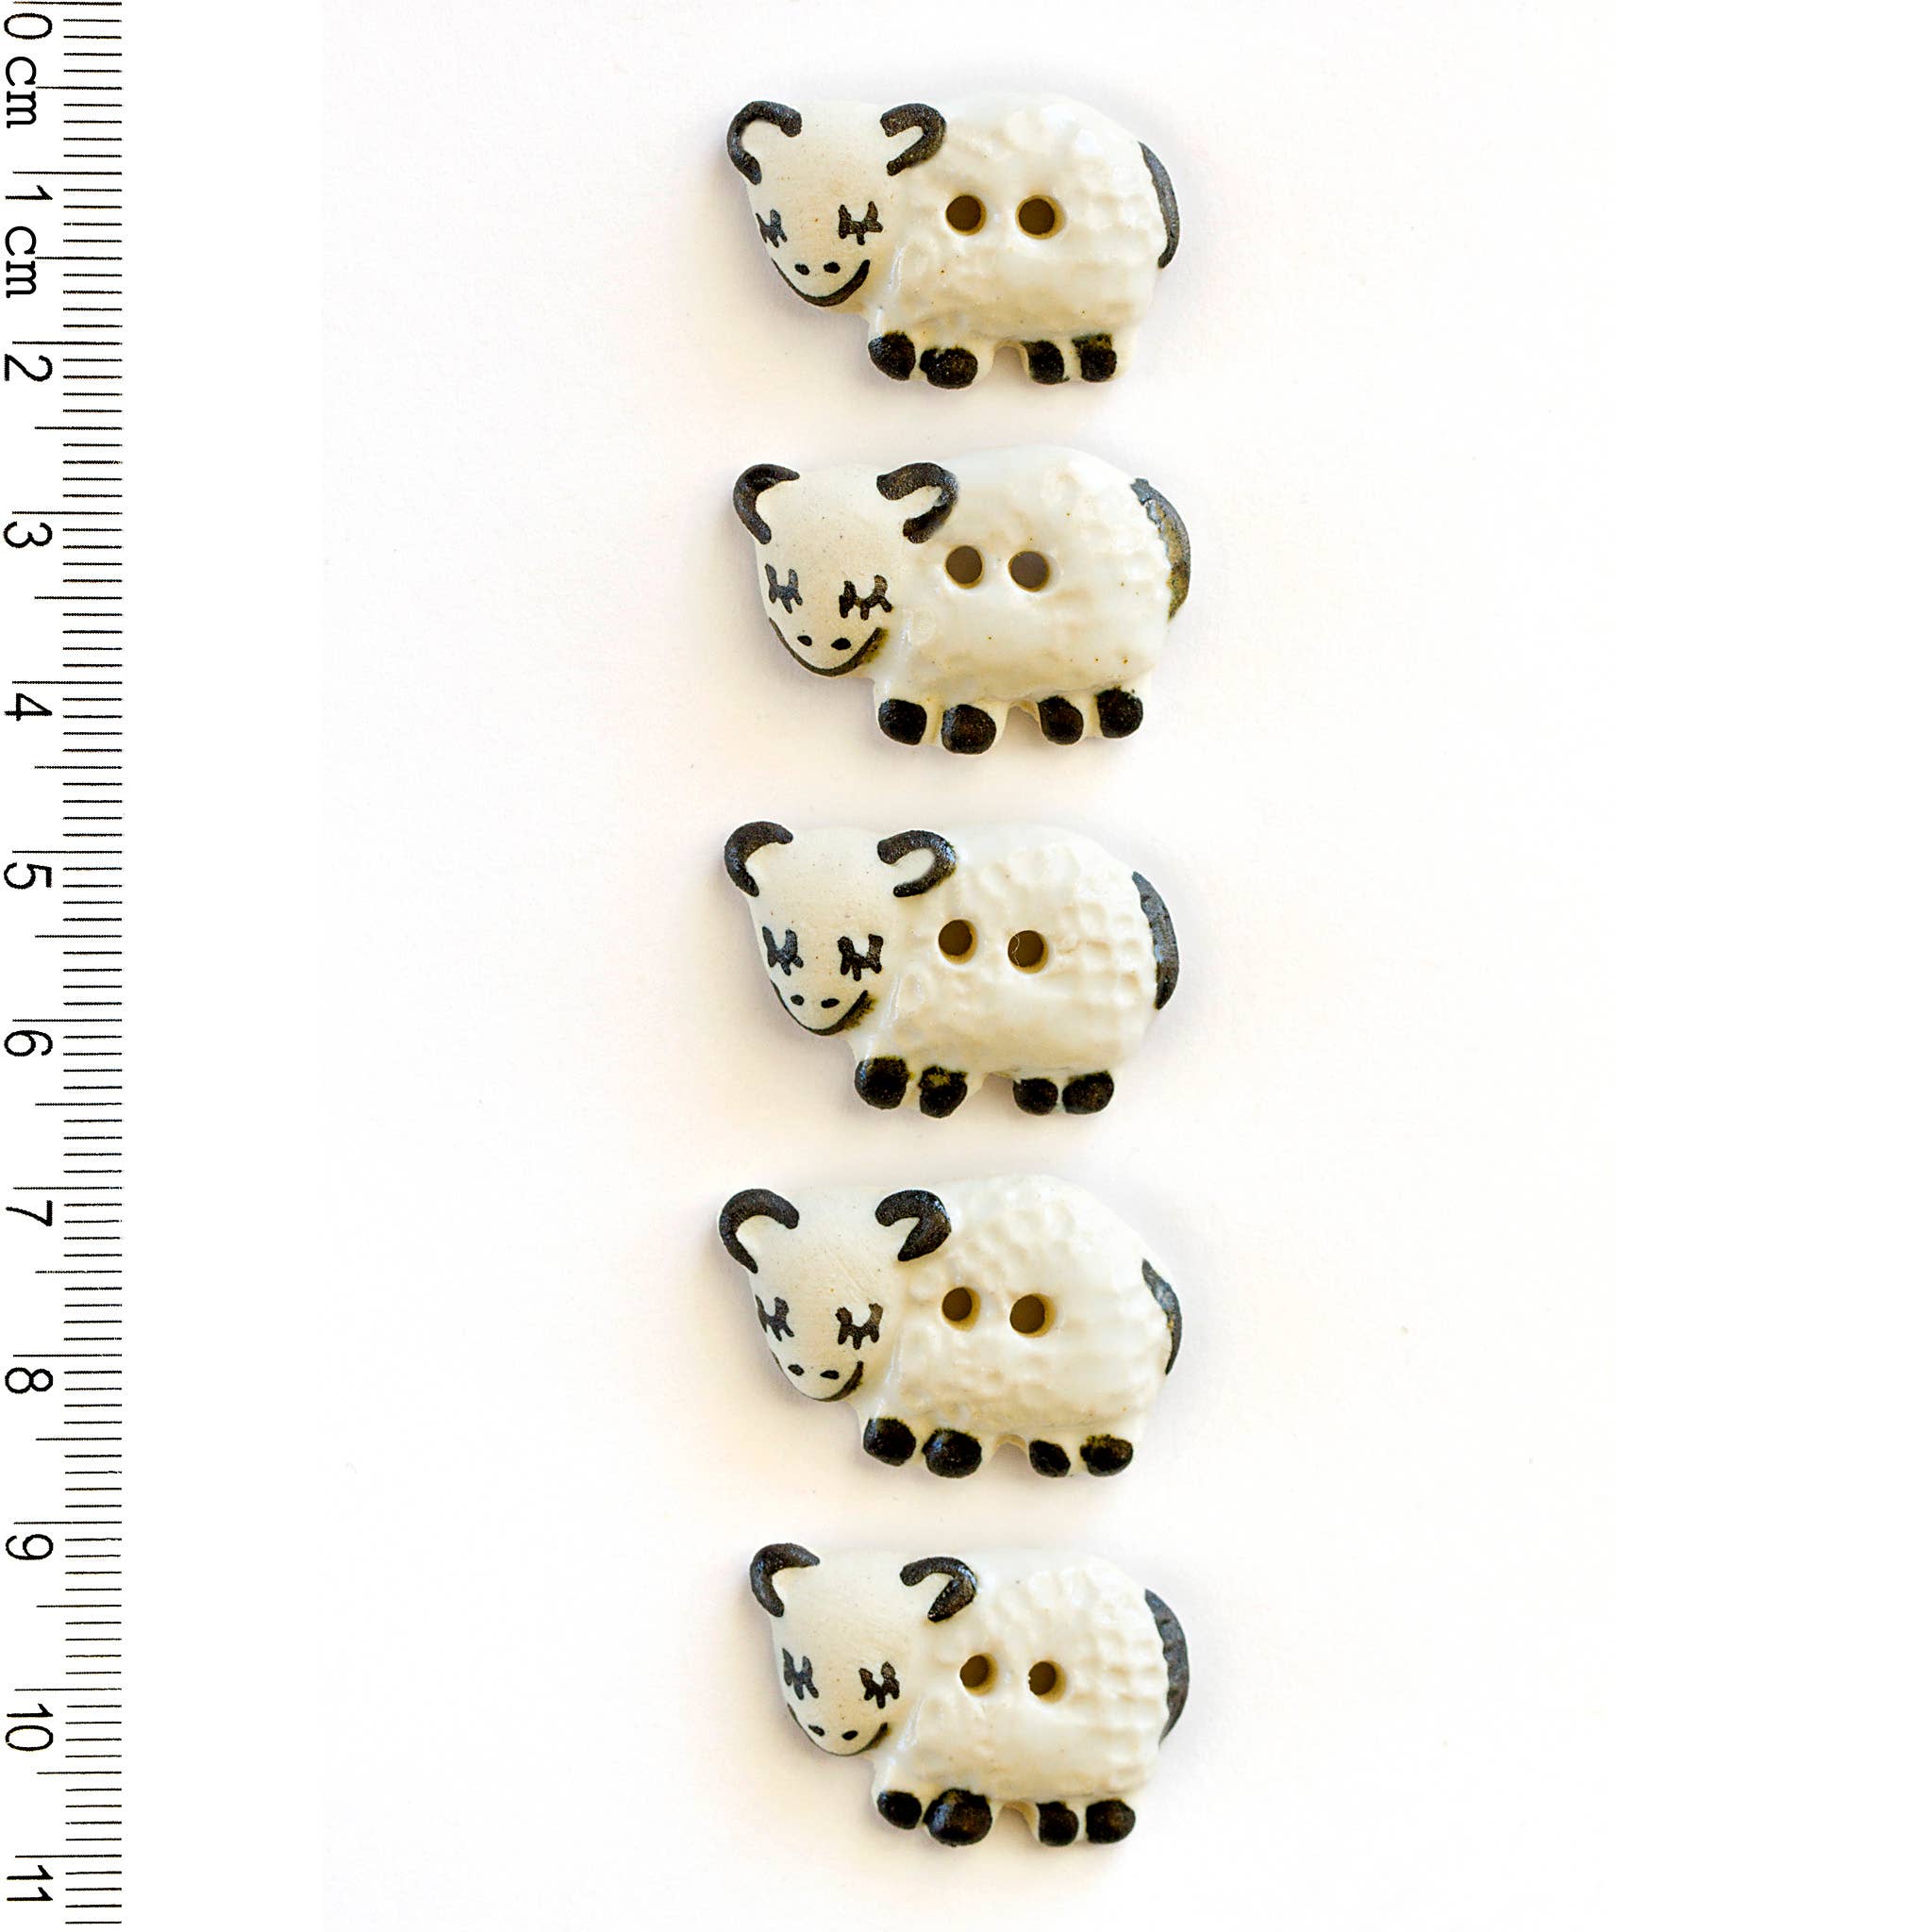 Incomparable Buttons - 5 Smiley Sheep Buttons